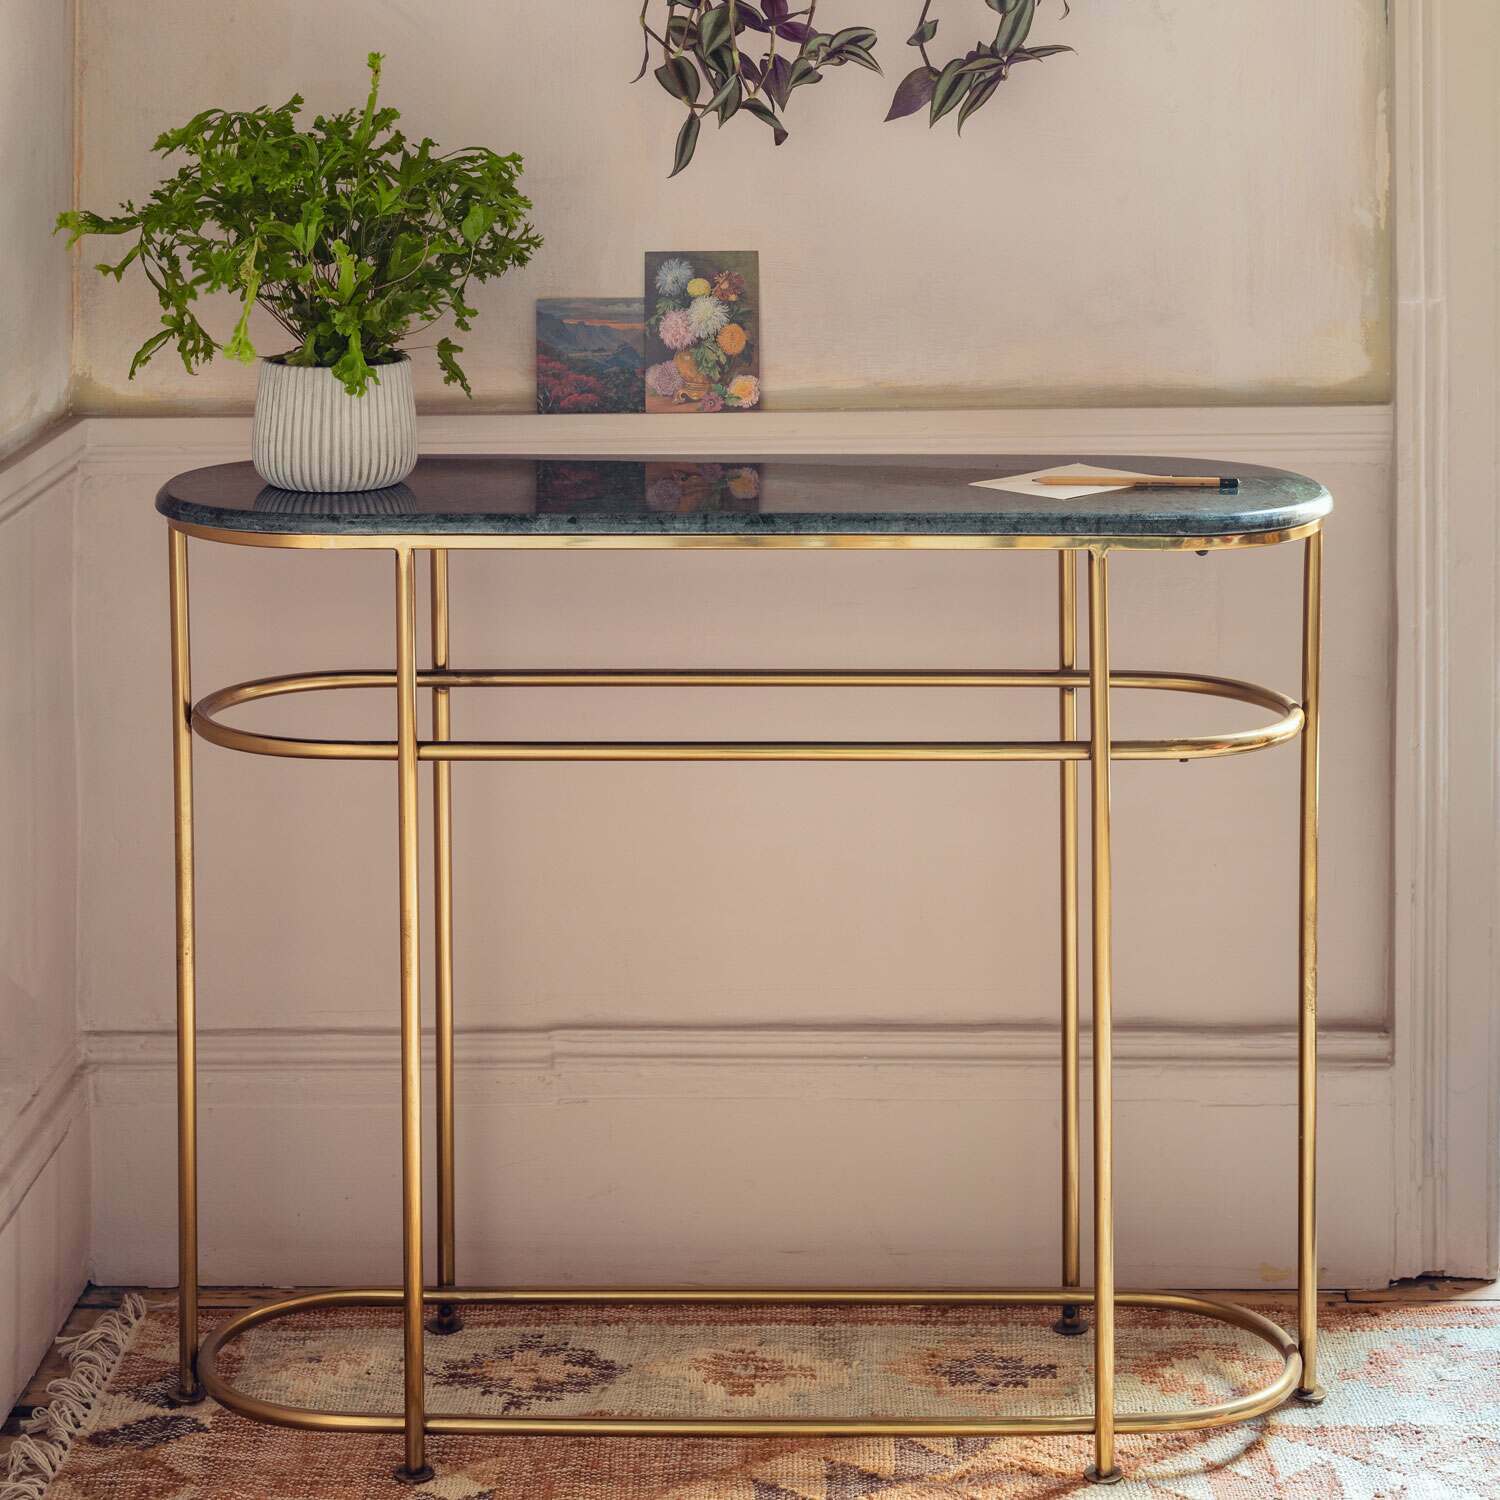 Read more about Graham and green alberto green marble console table